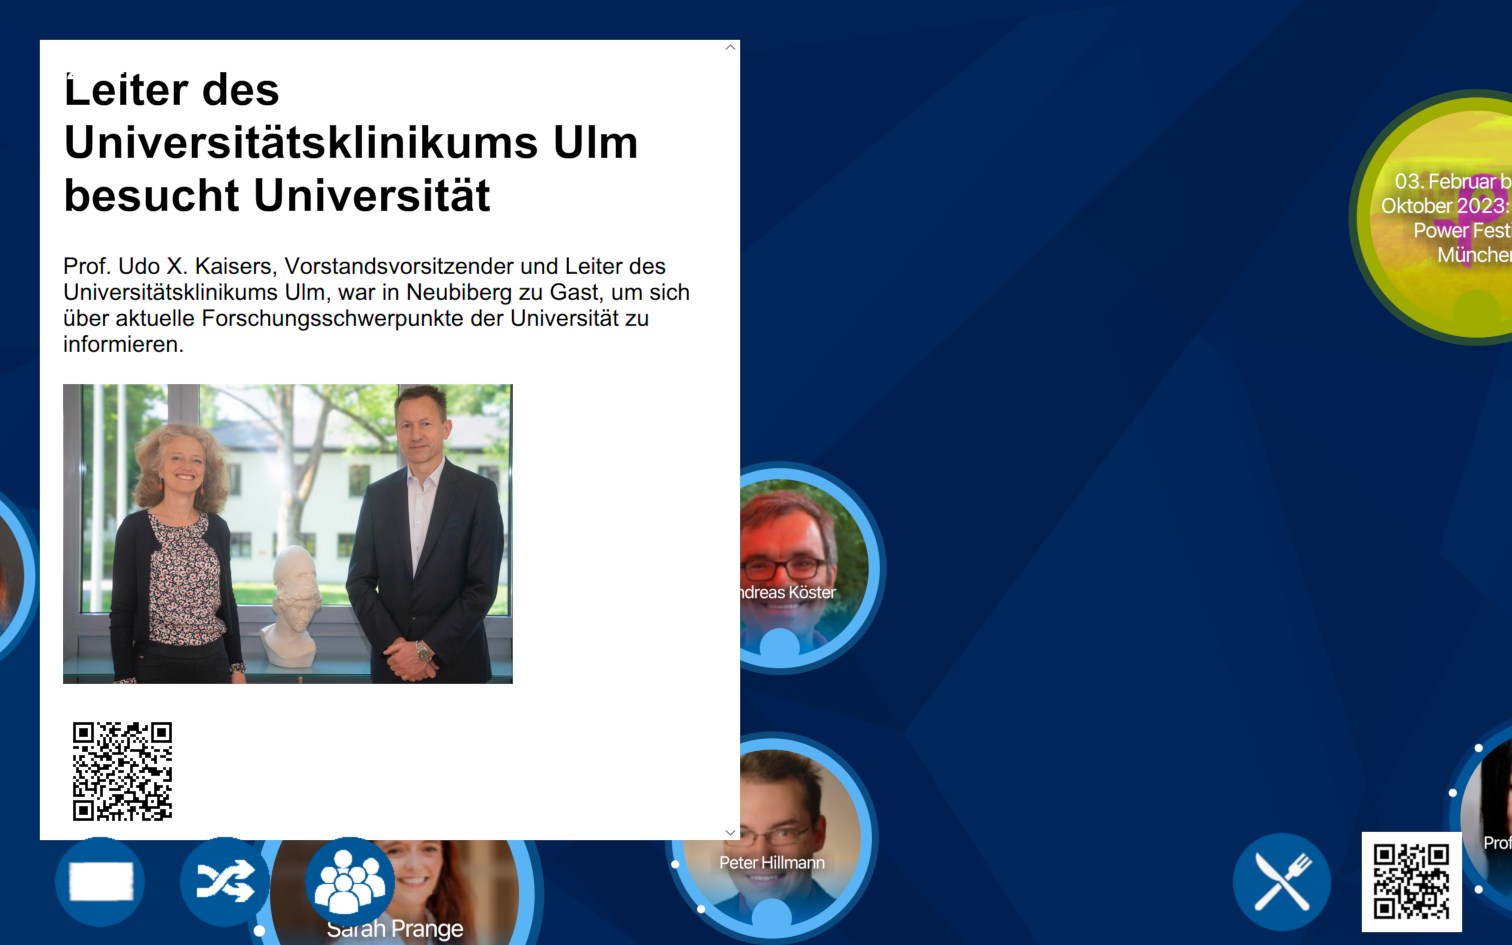 CommunityMirror screenshot with a large poster in German language that covers about half of the screen.